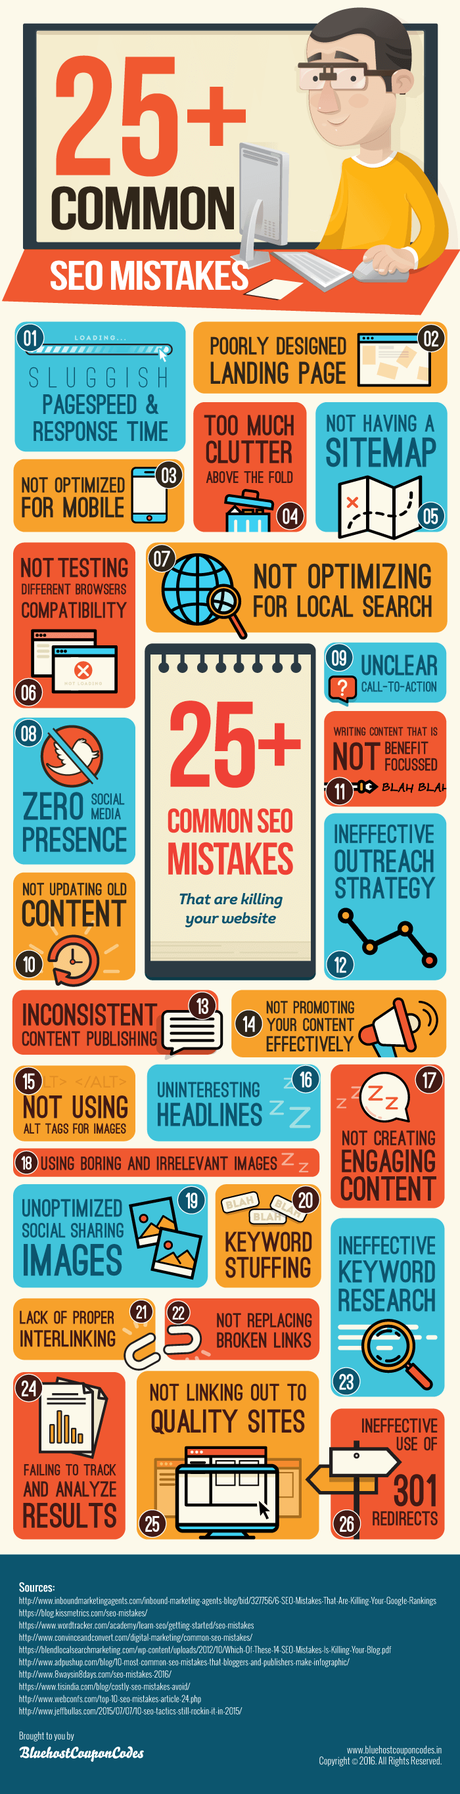 6 Common SEO Mistakes People Make & Infographic With 25+ SEO Mistakes